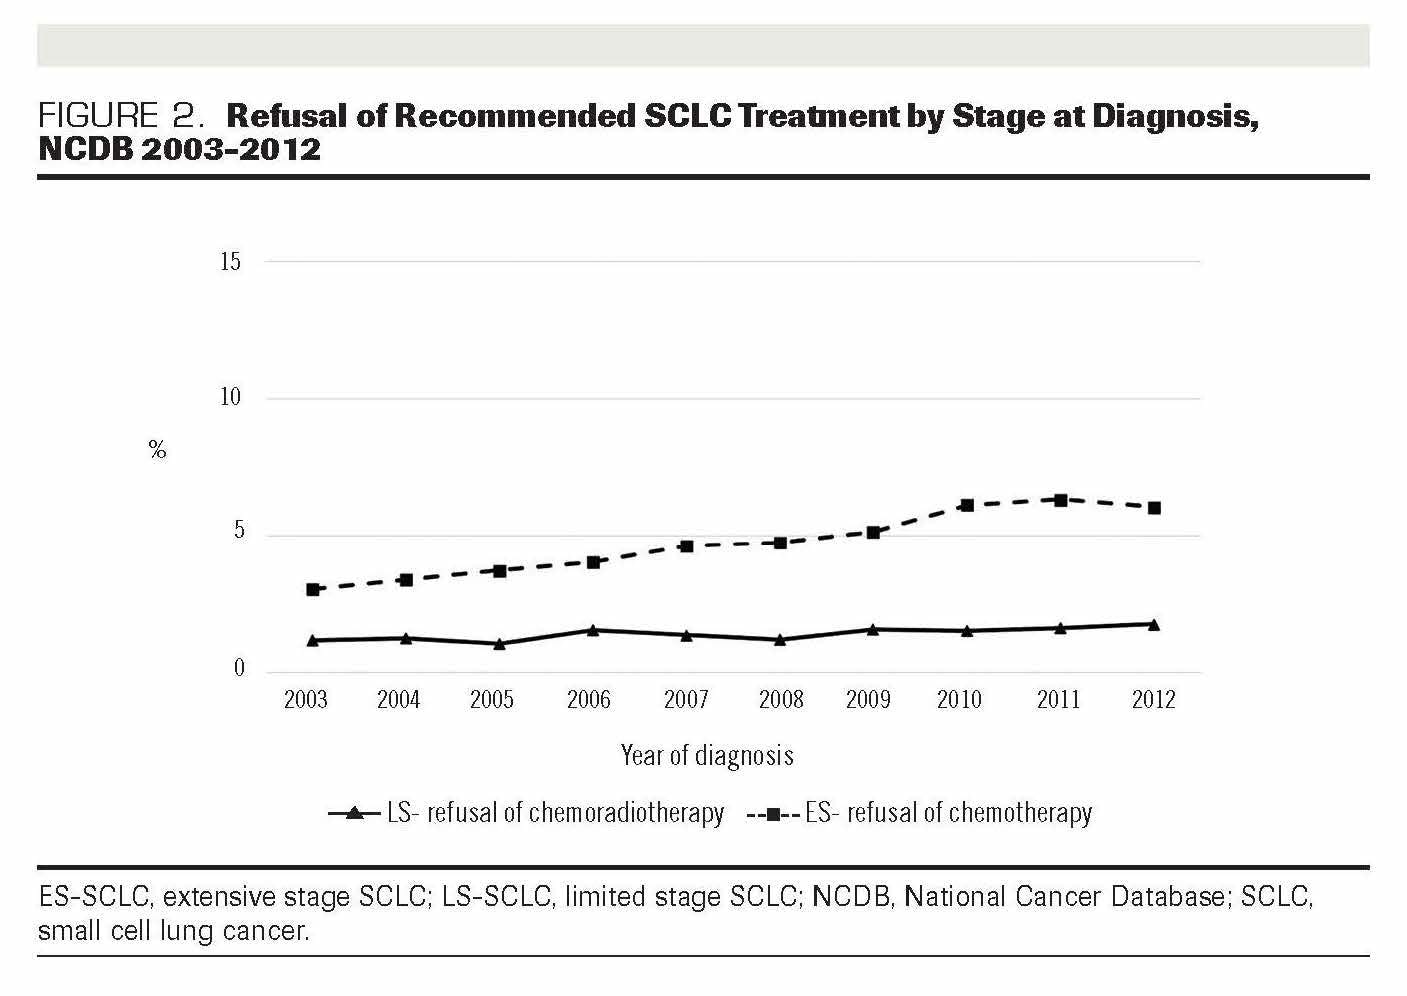 FIGURE 2. Refusal of Recommended SCLC Treatment by Stage at Diagnosis, NCDB 2003-2012